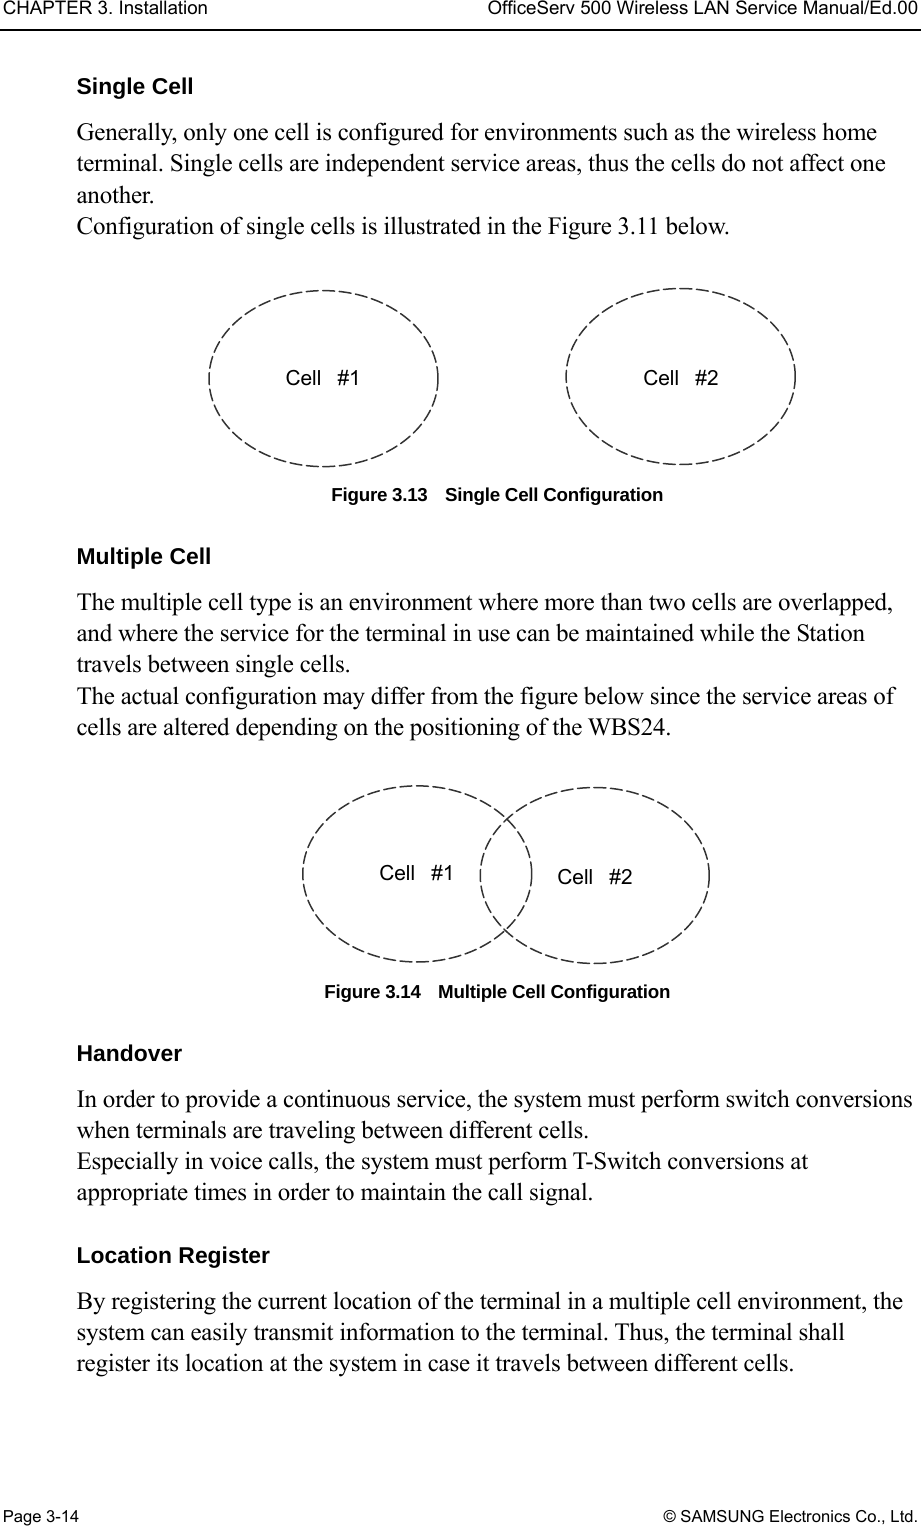 CHAPTER 3. Installation  OfficeServ 500 Wireless LAN Service Manual/Ed.00 Page 3-14 © SAMSUNG Electronics Co., Ltd. Single Cell Generally, only one cell is configured for environments such as the wireless home terminal. Single cells are independent service areas, thus the cells do not affect one another.  Configuration of single cells is illustrated in the Figure 3.11 below.  Figure 3.13    Single Cell Configuration  Multiple Cell The multiple cell type is an environment where more than two cells are overlapped, and where the service for the terminal in use can be maintained while the Station travels between single cells.   The actual configuration may differ from the figure below since the service areas of cells are altered depending on the positioning of the WBS24.  Figure 3.14    Multiple Cell Configuration    Handover In order to provide a continuous service, the system must perform switch conversions when terminals are traveling between different cells.   Especially in voice calls, the system must perform T-Switch conversions at appropriate times in order to maintain the call signal.  Location Register By registering the current location of the terminal in a multiple cell environment, the system can easily transmit information to the terminal. Thus, the terminal shall register its location at the system in case it travels between different cells.   Cell  #1  Cell  #2 Cell  #1  Cell  #2 